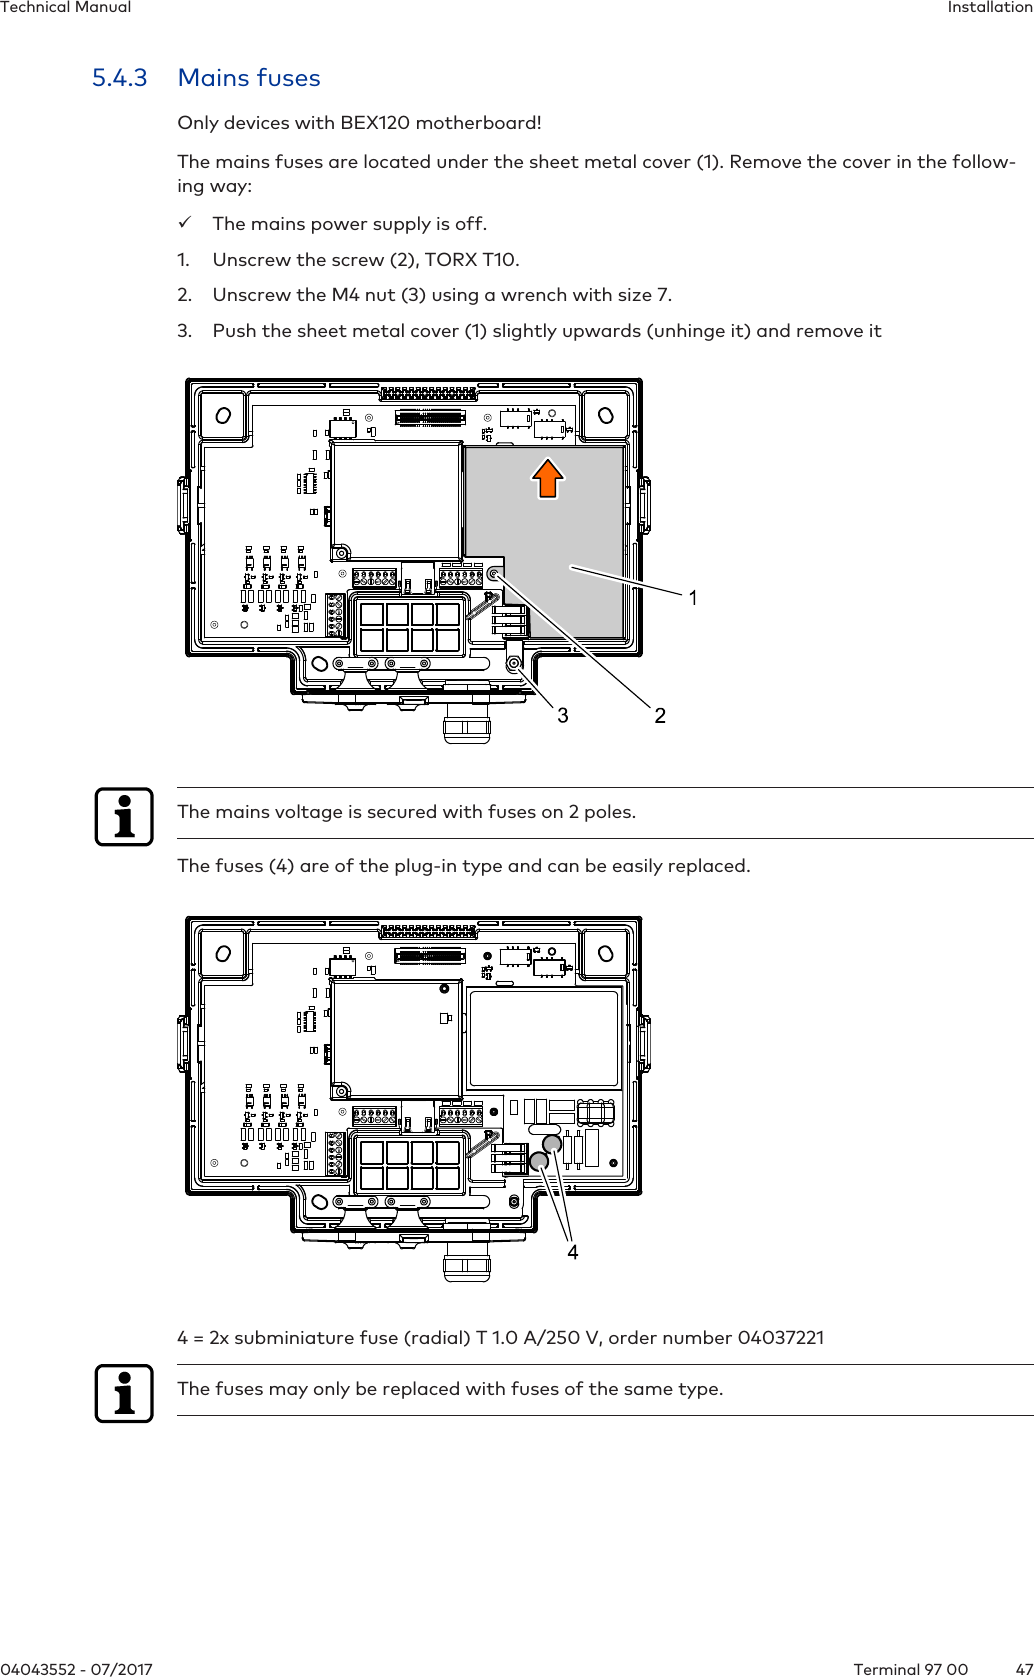 InstallationTechnical Manual4704043552 - 07/2017 Terminal 97 005.4.3 Mains fusesOnly devices with BEX120 motherboard!The mains fuses are located under the sheet metal cover (1). Remove the cover in the follow-ing way:üThe mains power supply is off.1. Unscrew the screw (2), TORX T10.2. Unscrew the M4 nut (3) using a wrench with size 7.3. Push the sheet metal cover (1) slightly upwards (unhinge it) and remove itThe mains voltage is secured with fuses on 2 poles.The fuses (4) are of the plug-in type and can be easily replaced.4 = 2x subminiature fuse (radial) T 1.0 A/250 V, order number 04037221The fuses may only be replaced with fuses of the same type.